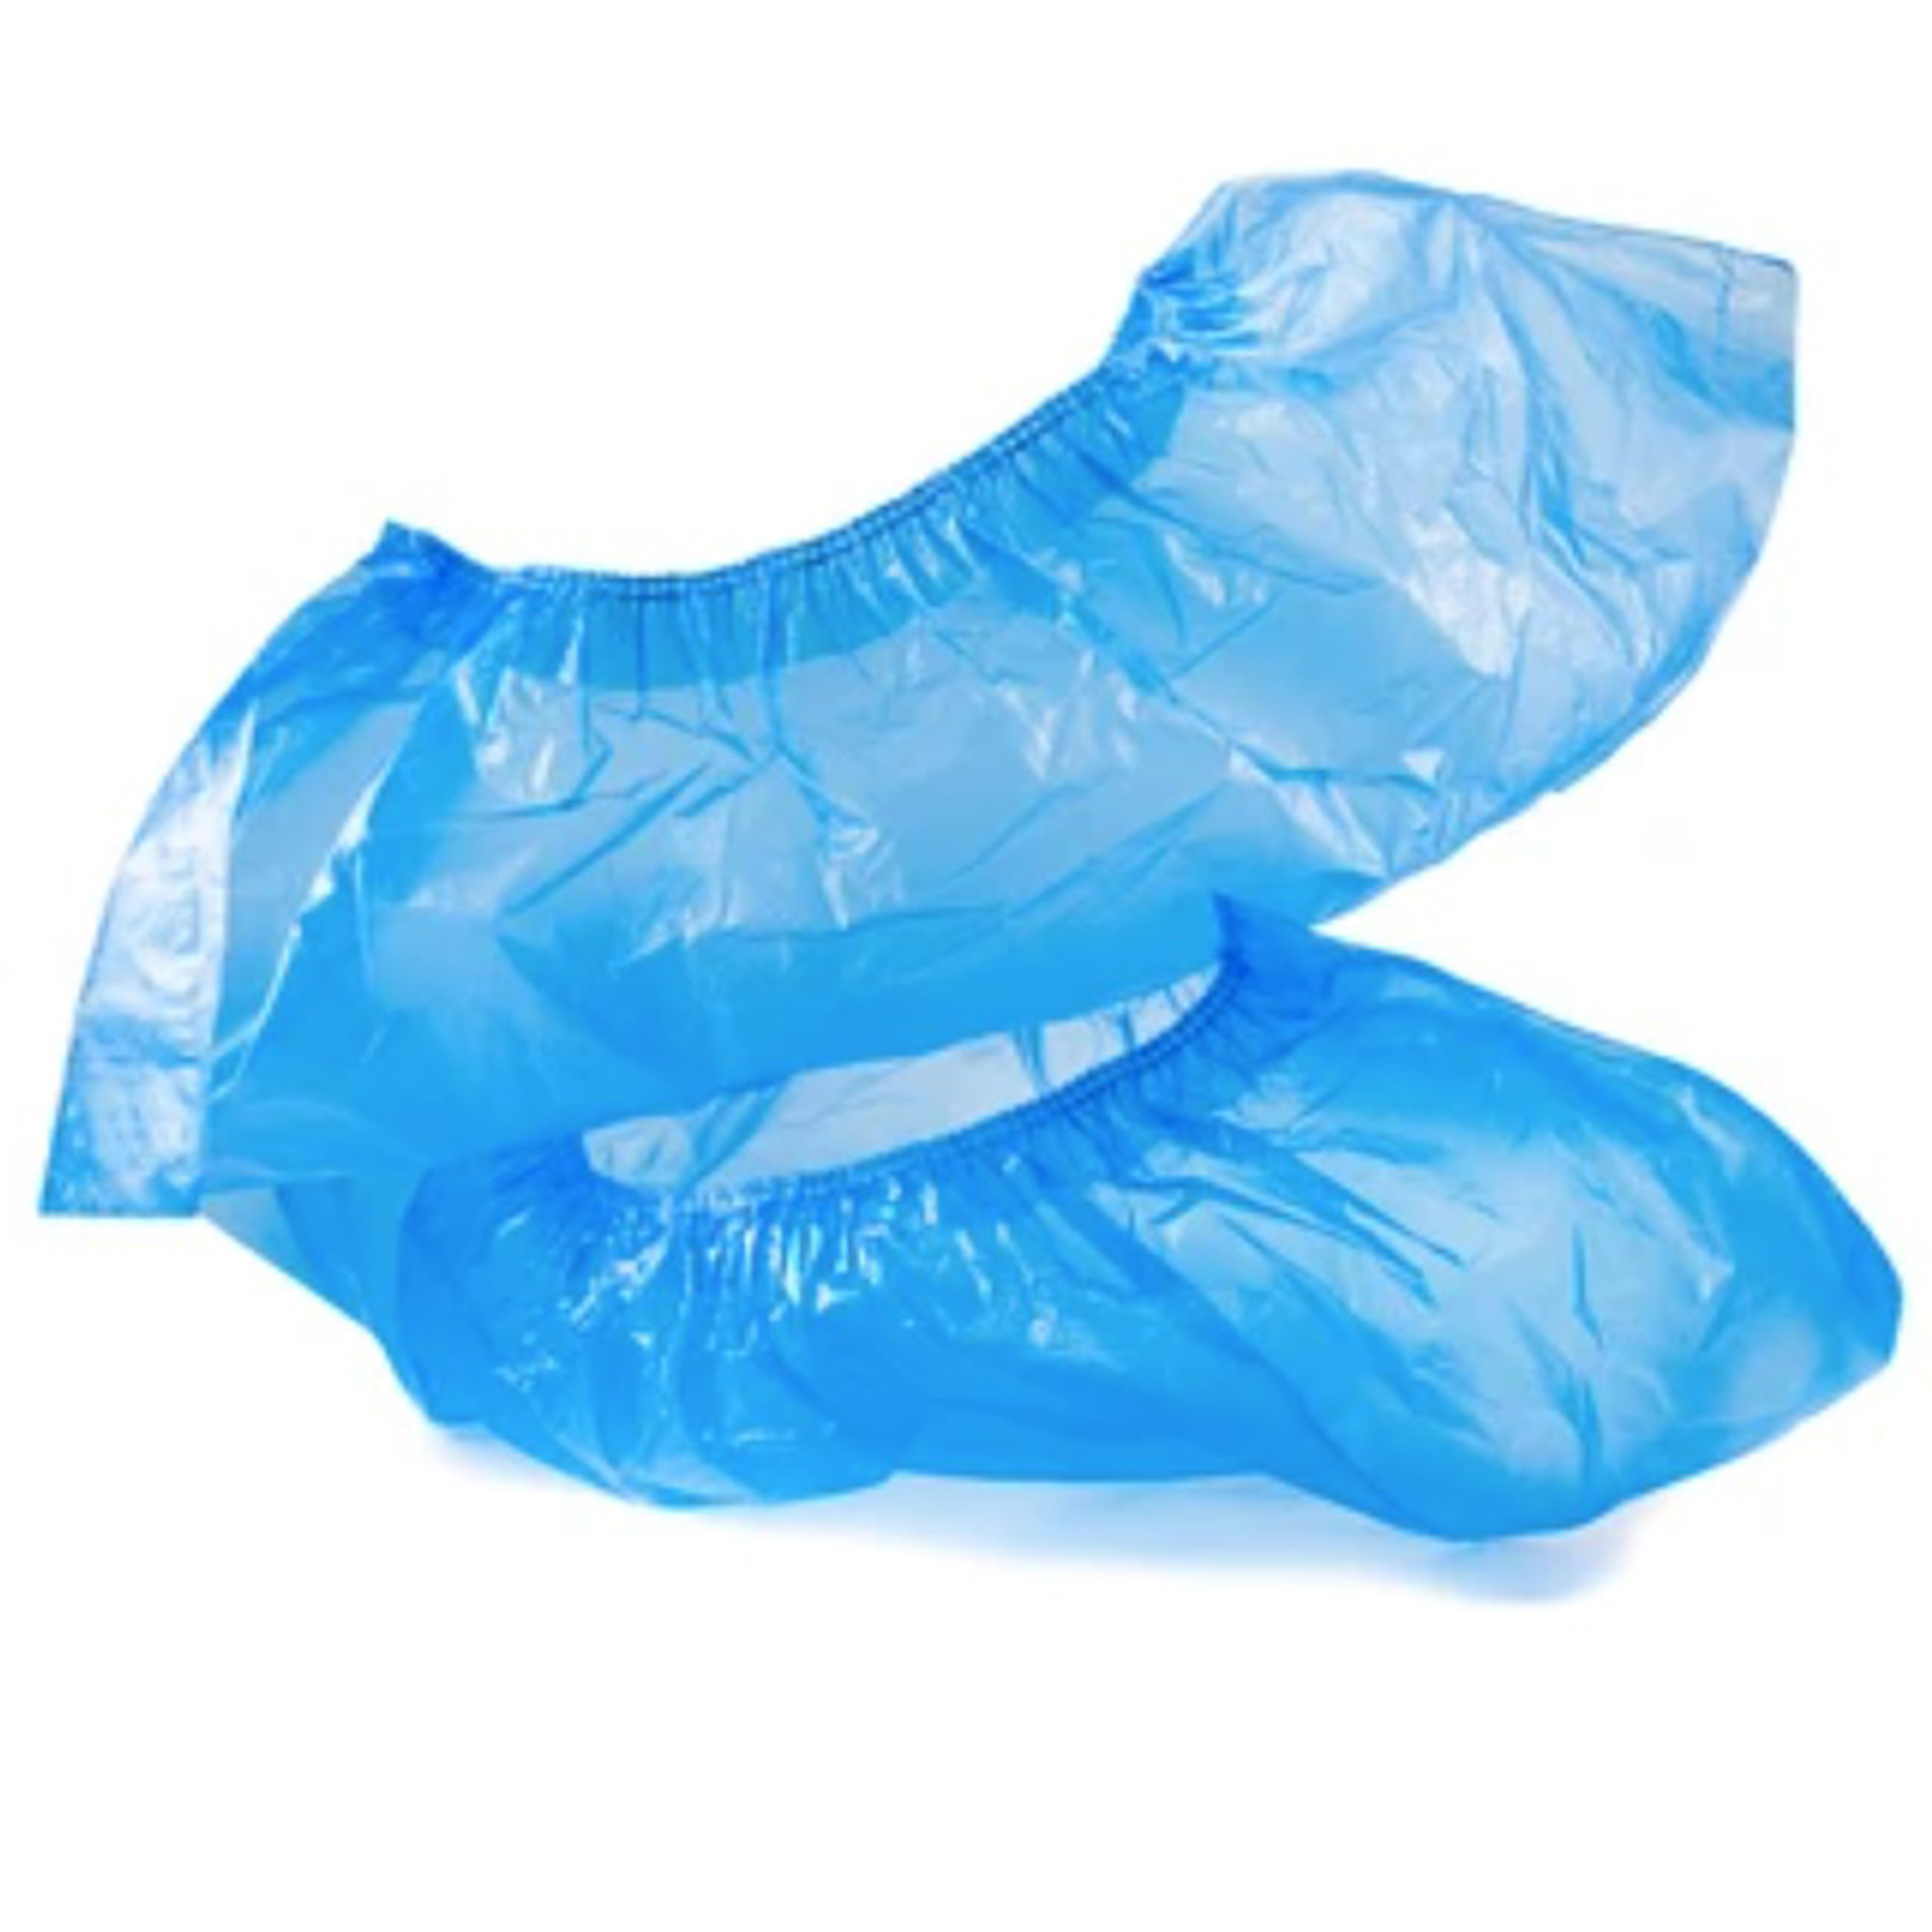 Veterinary/DISPOSABLE PROTECTION VETERINARY ARTICLES/Disposable Veterinary Shoe Covers